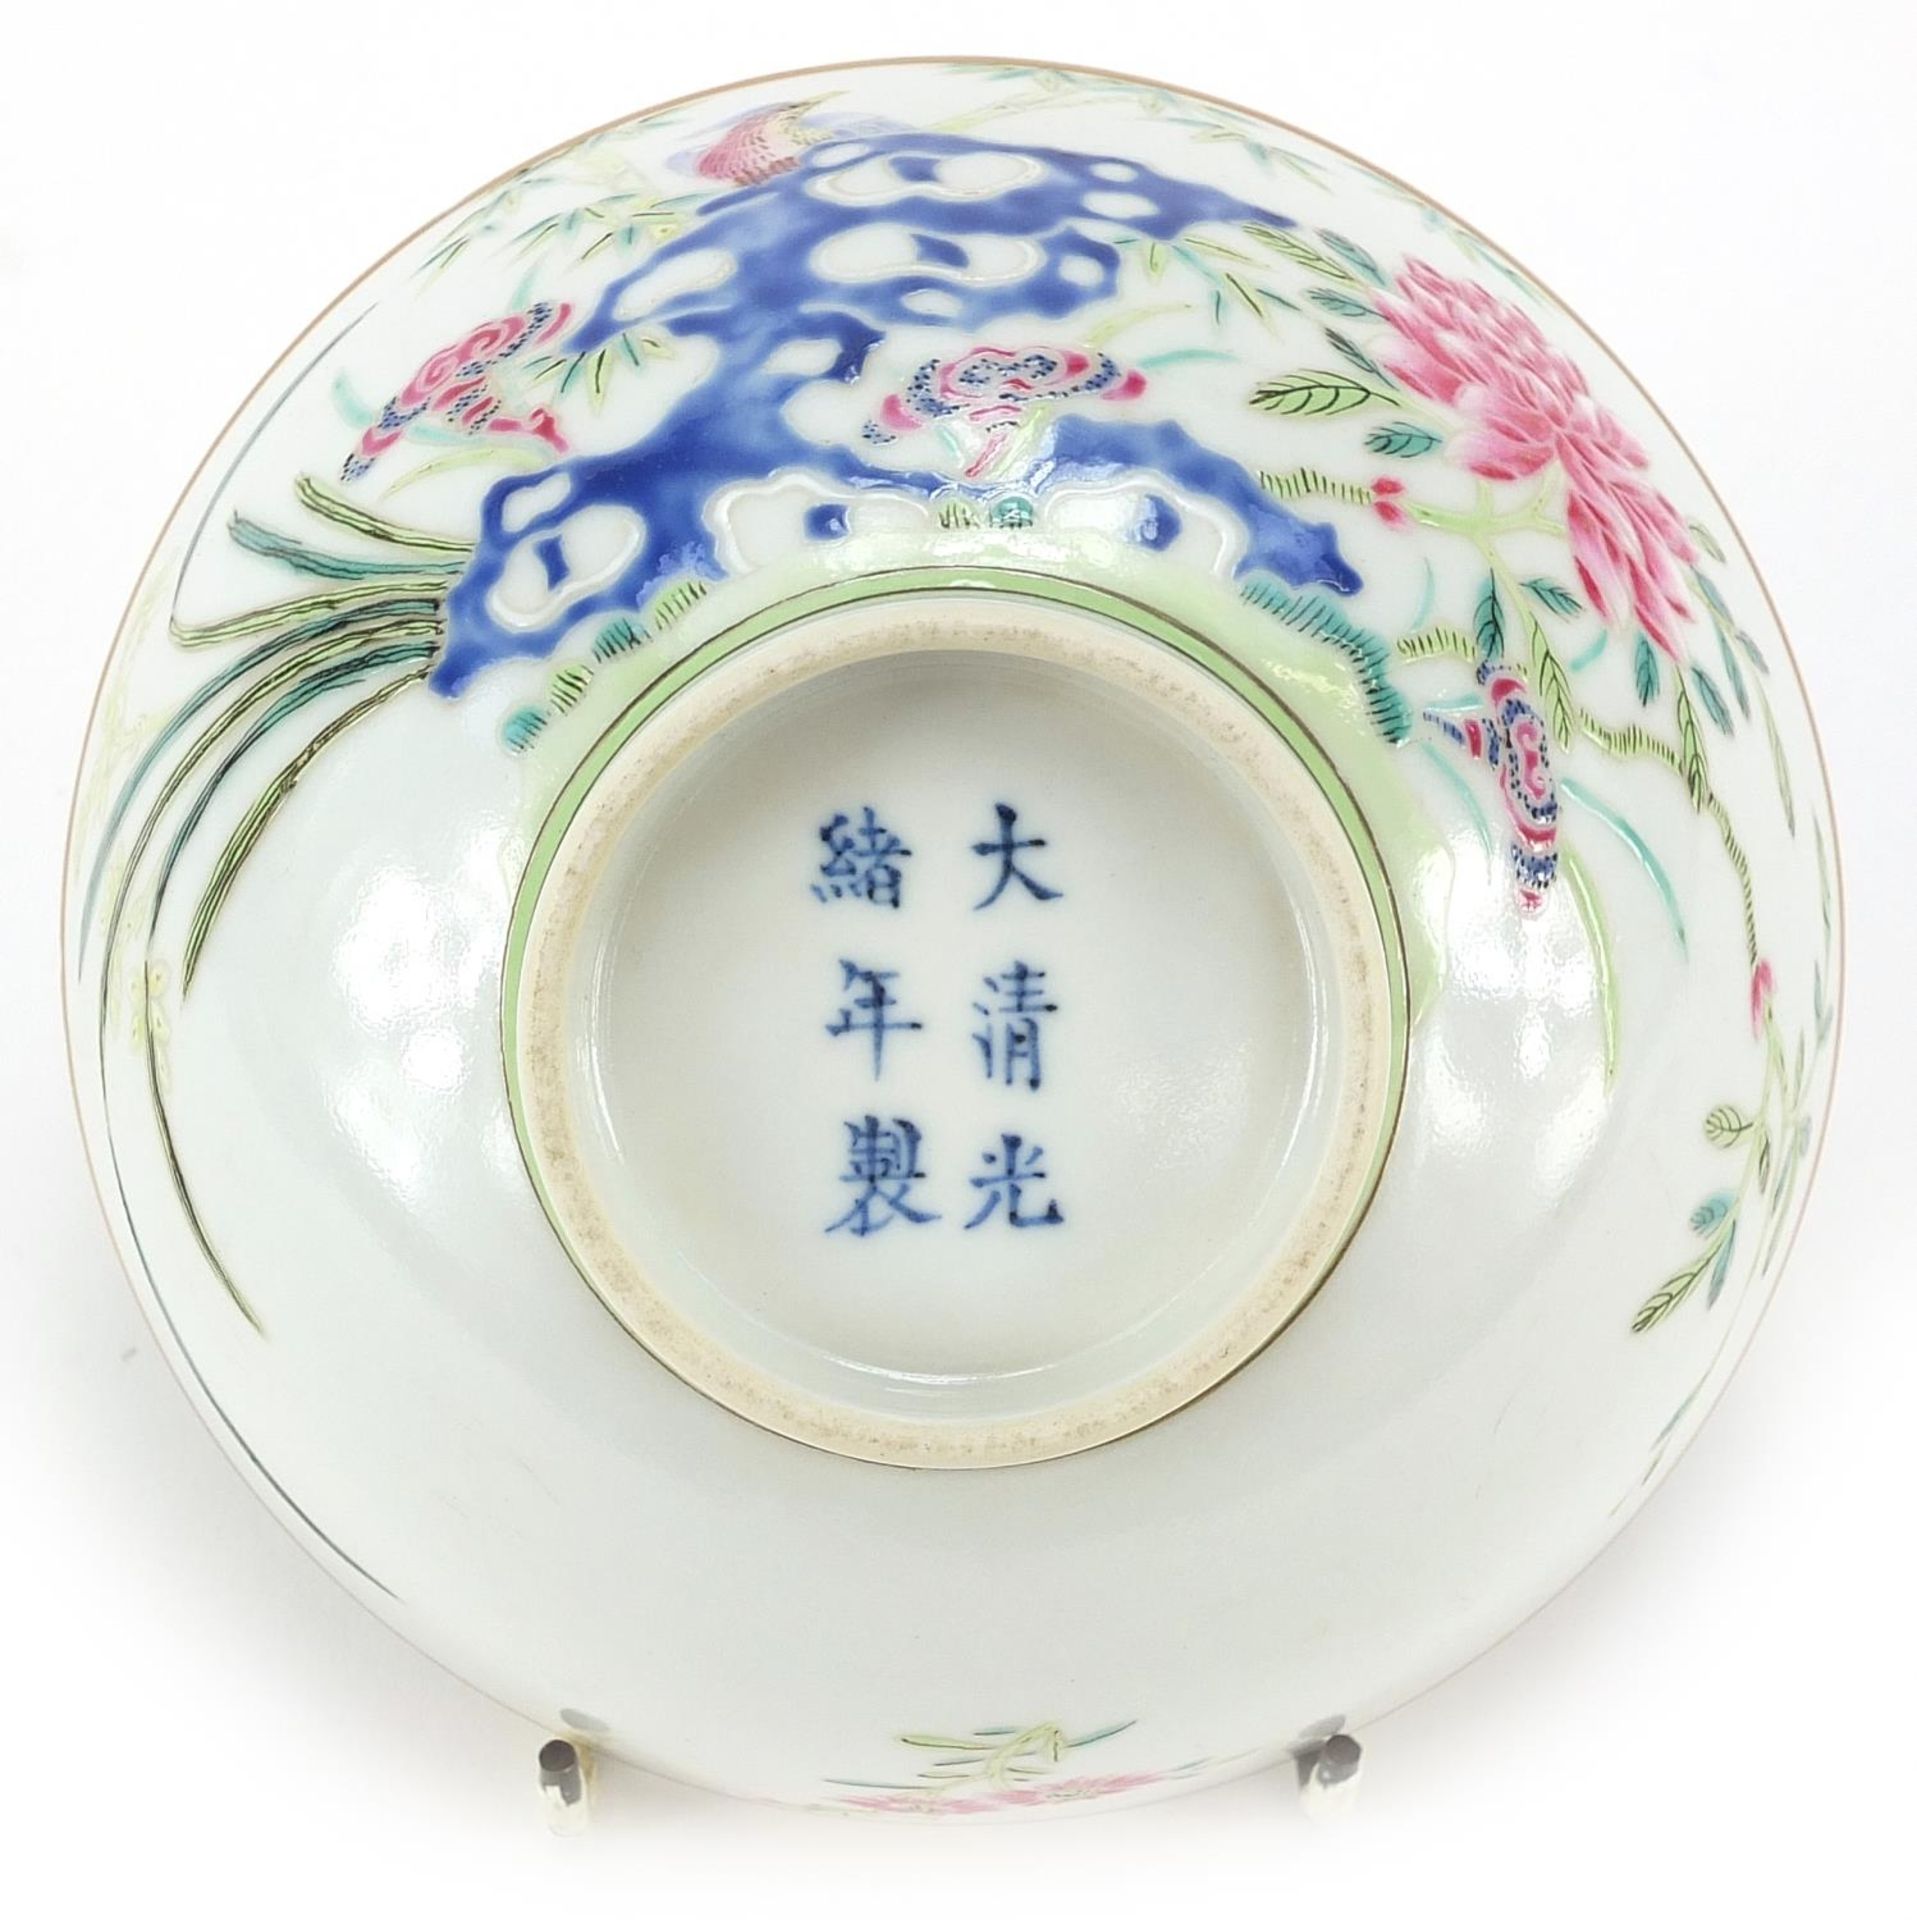 Chinese porcelain bowl hand painted with a bird of paradise amongst flowers, six figure character - Image 3 of 3